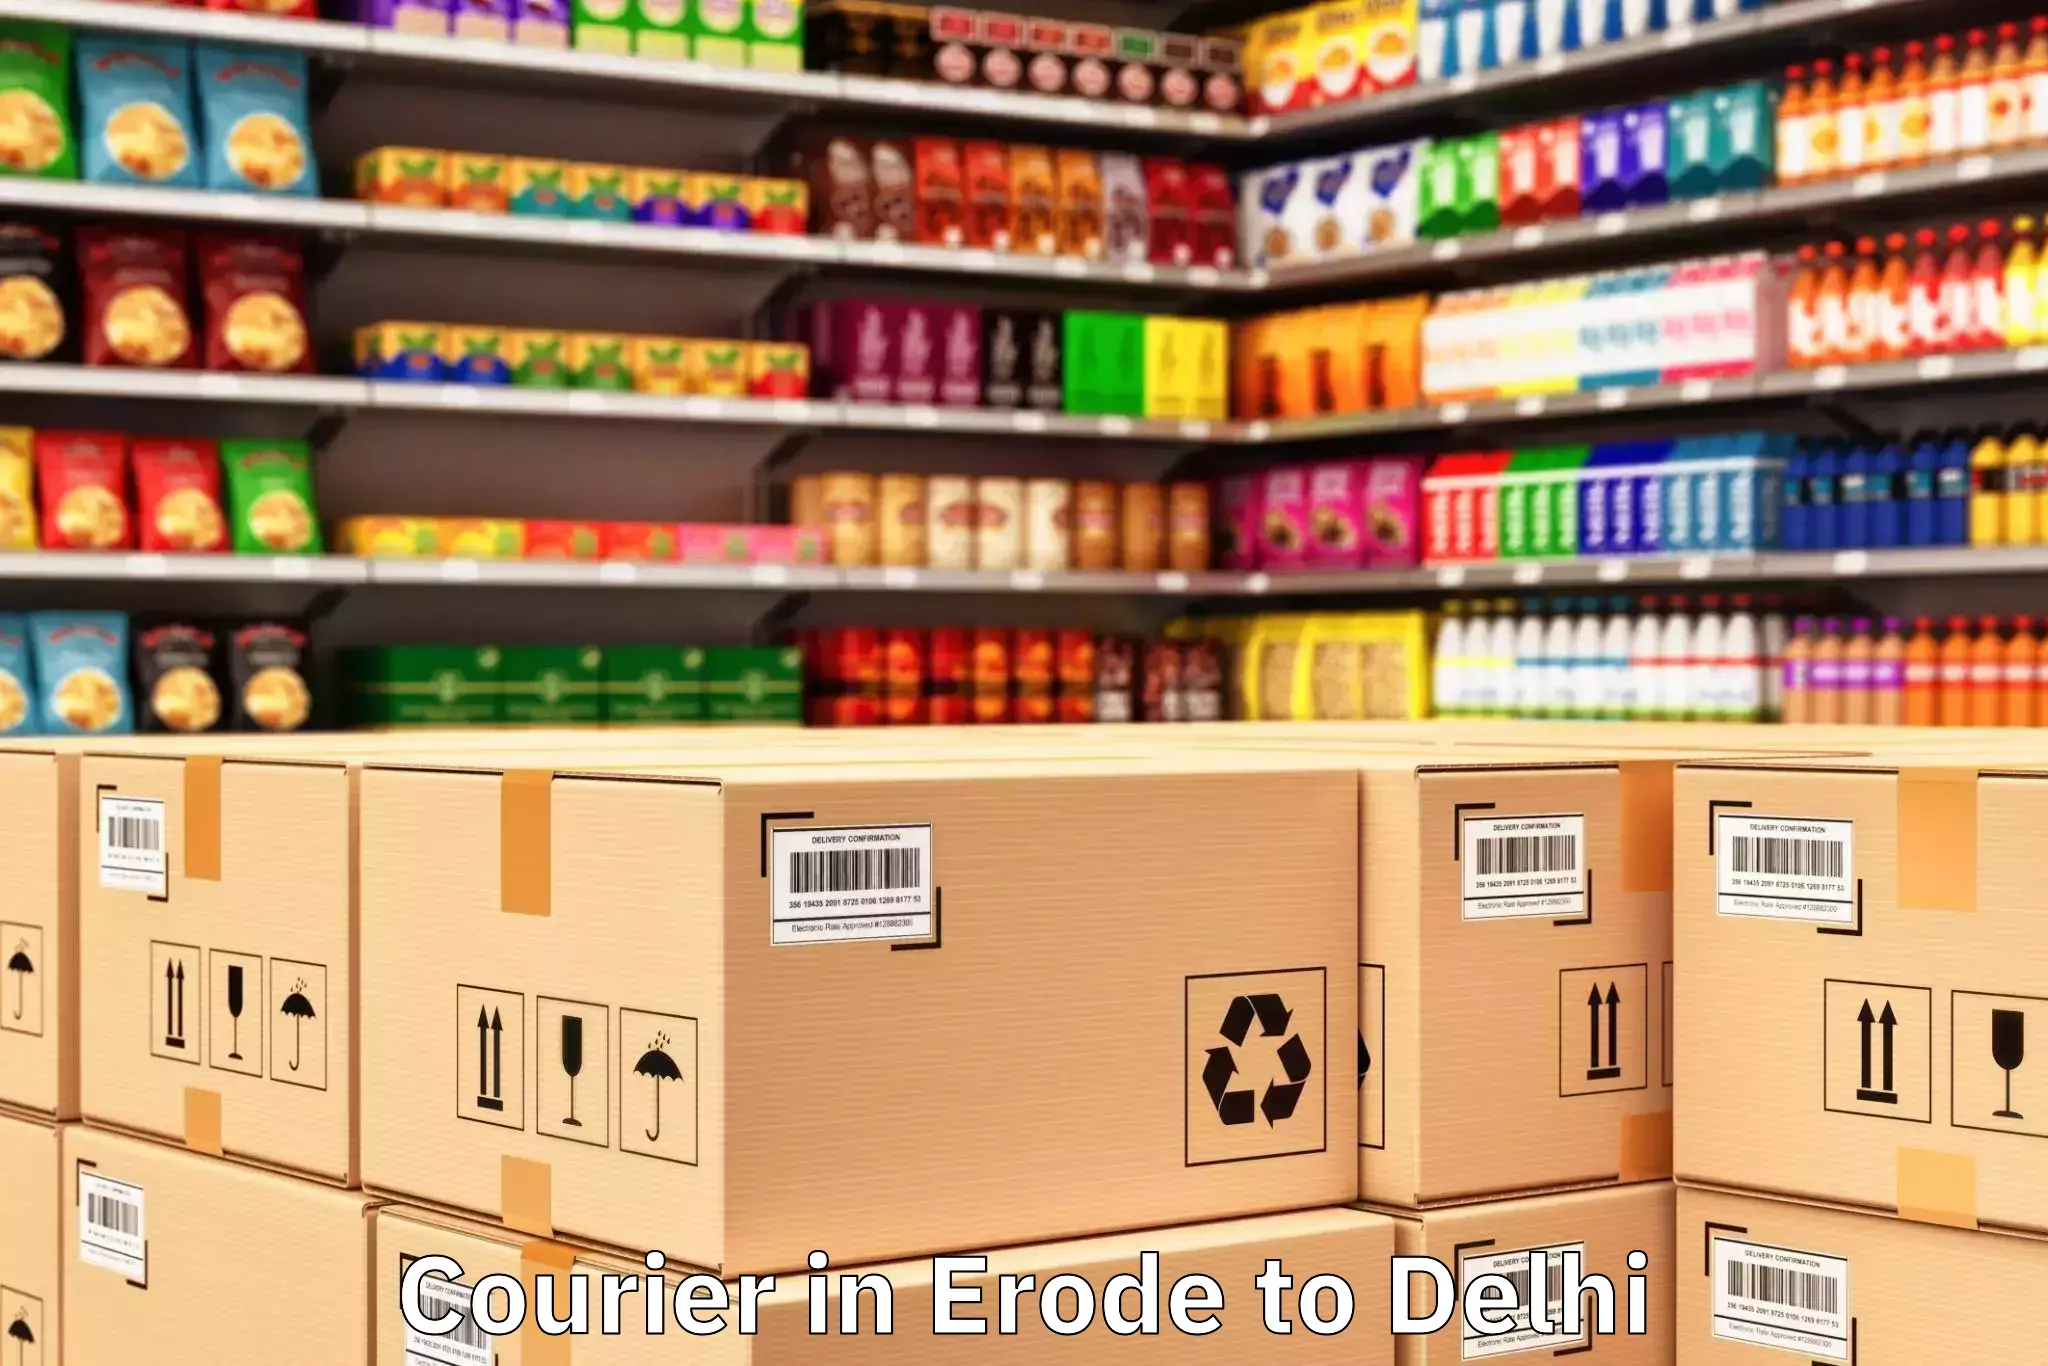 Easy Erode to Unity One Janakpuri Mall Courier Booking